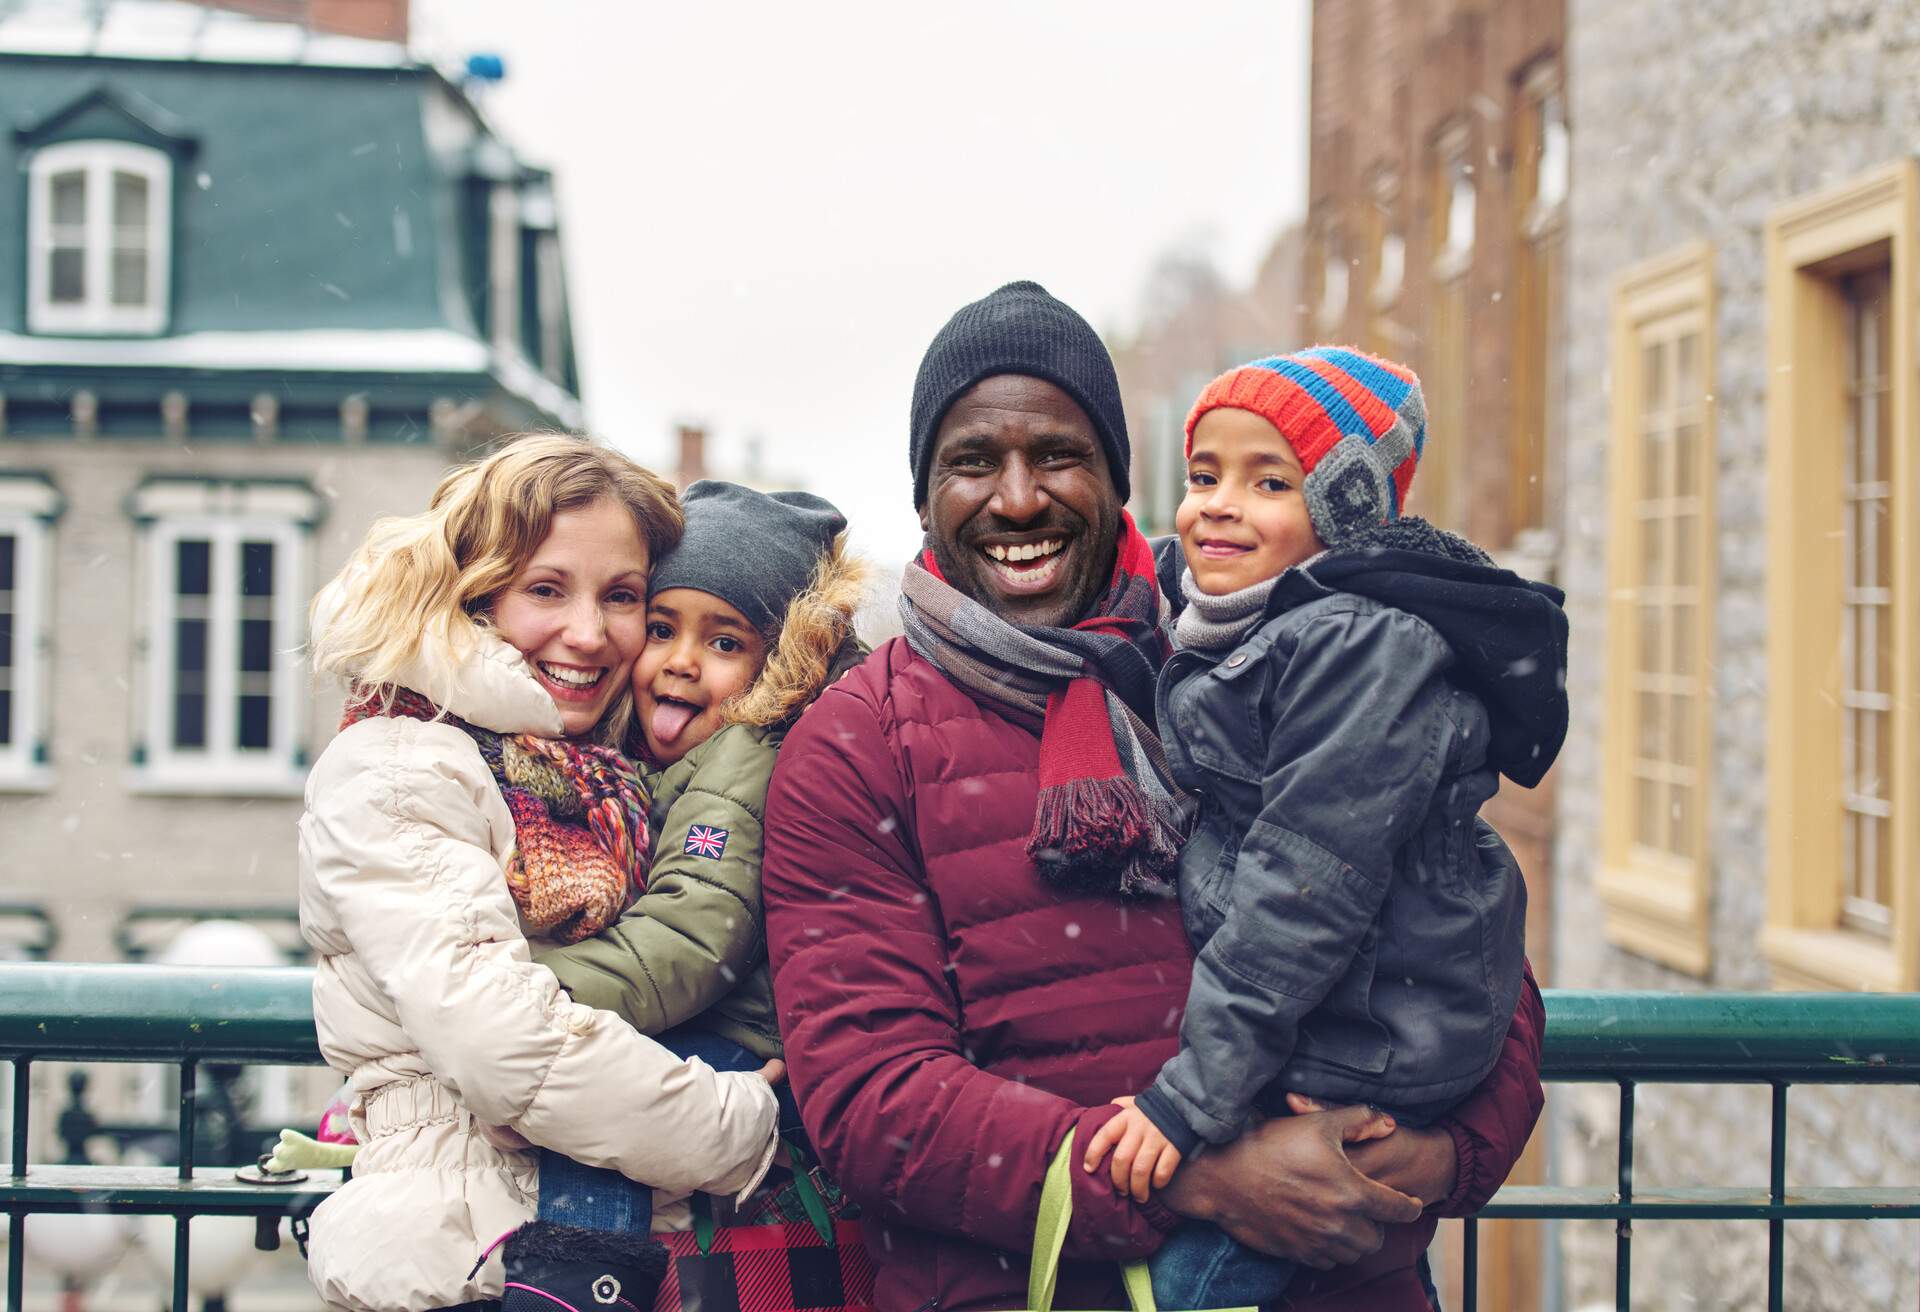 DEST_CANADA_QUEBEC_CITY_THEME_PEOPLE_FAMILY_MAN_WOMAN_KIDS_SNOW_GettyImages-893585516